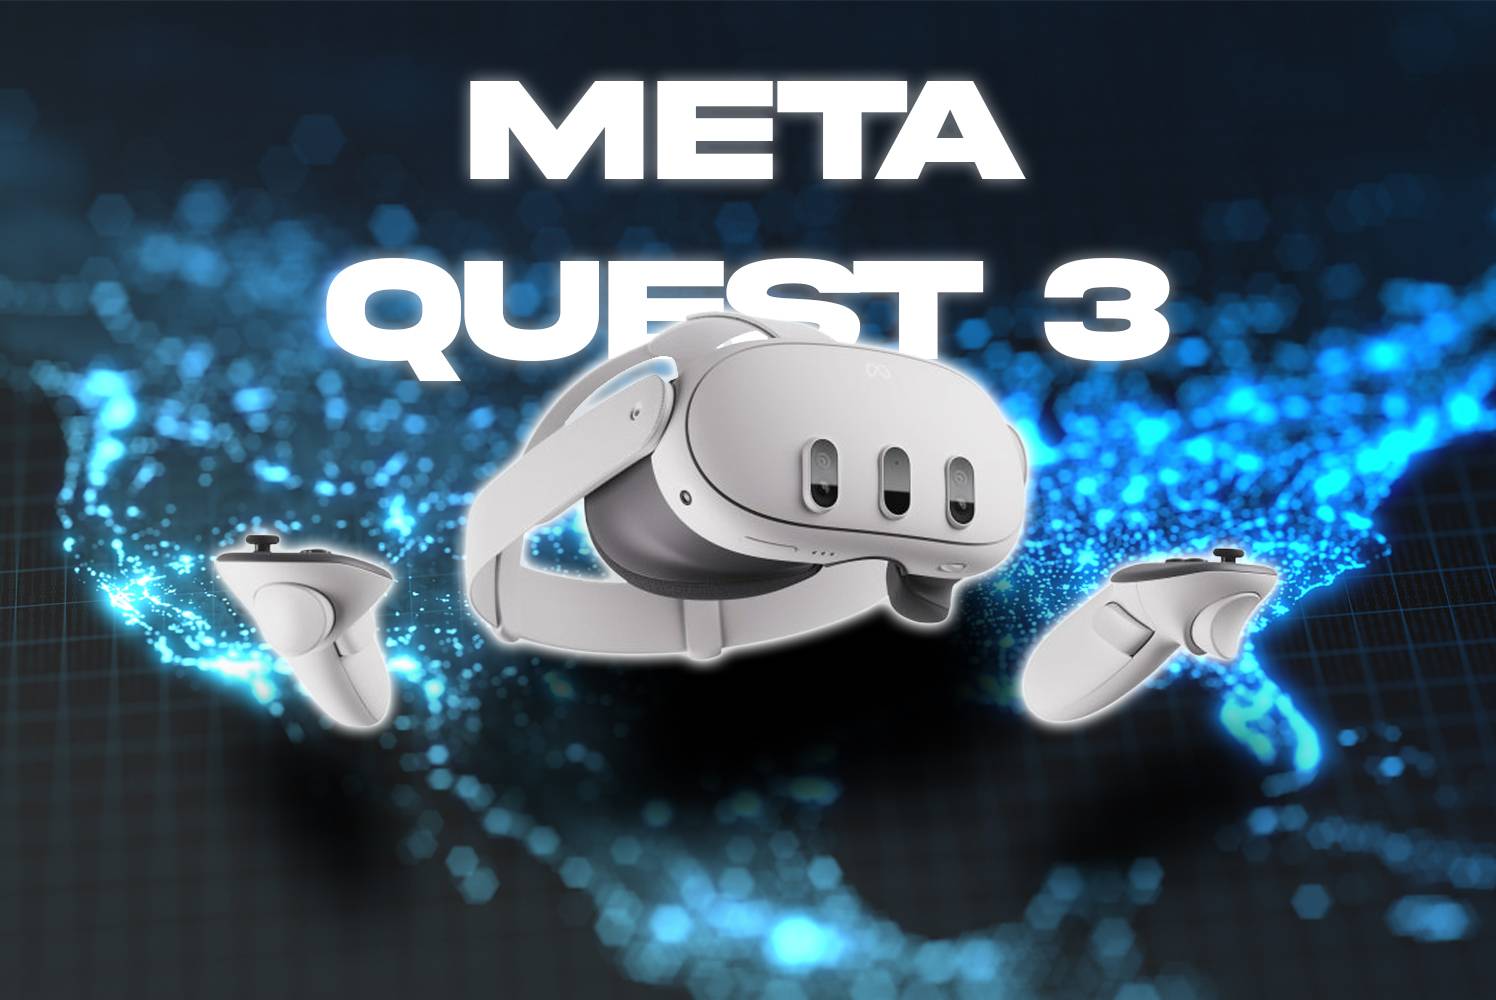 Win this Meta Quest 3 - Only 908 Entries